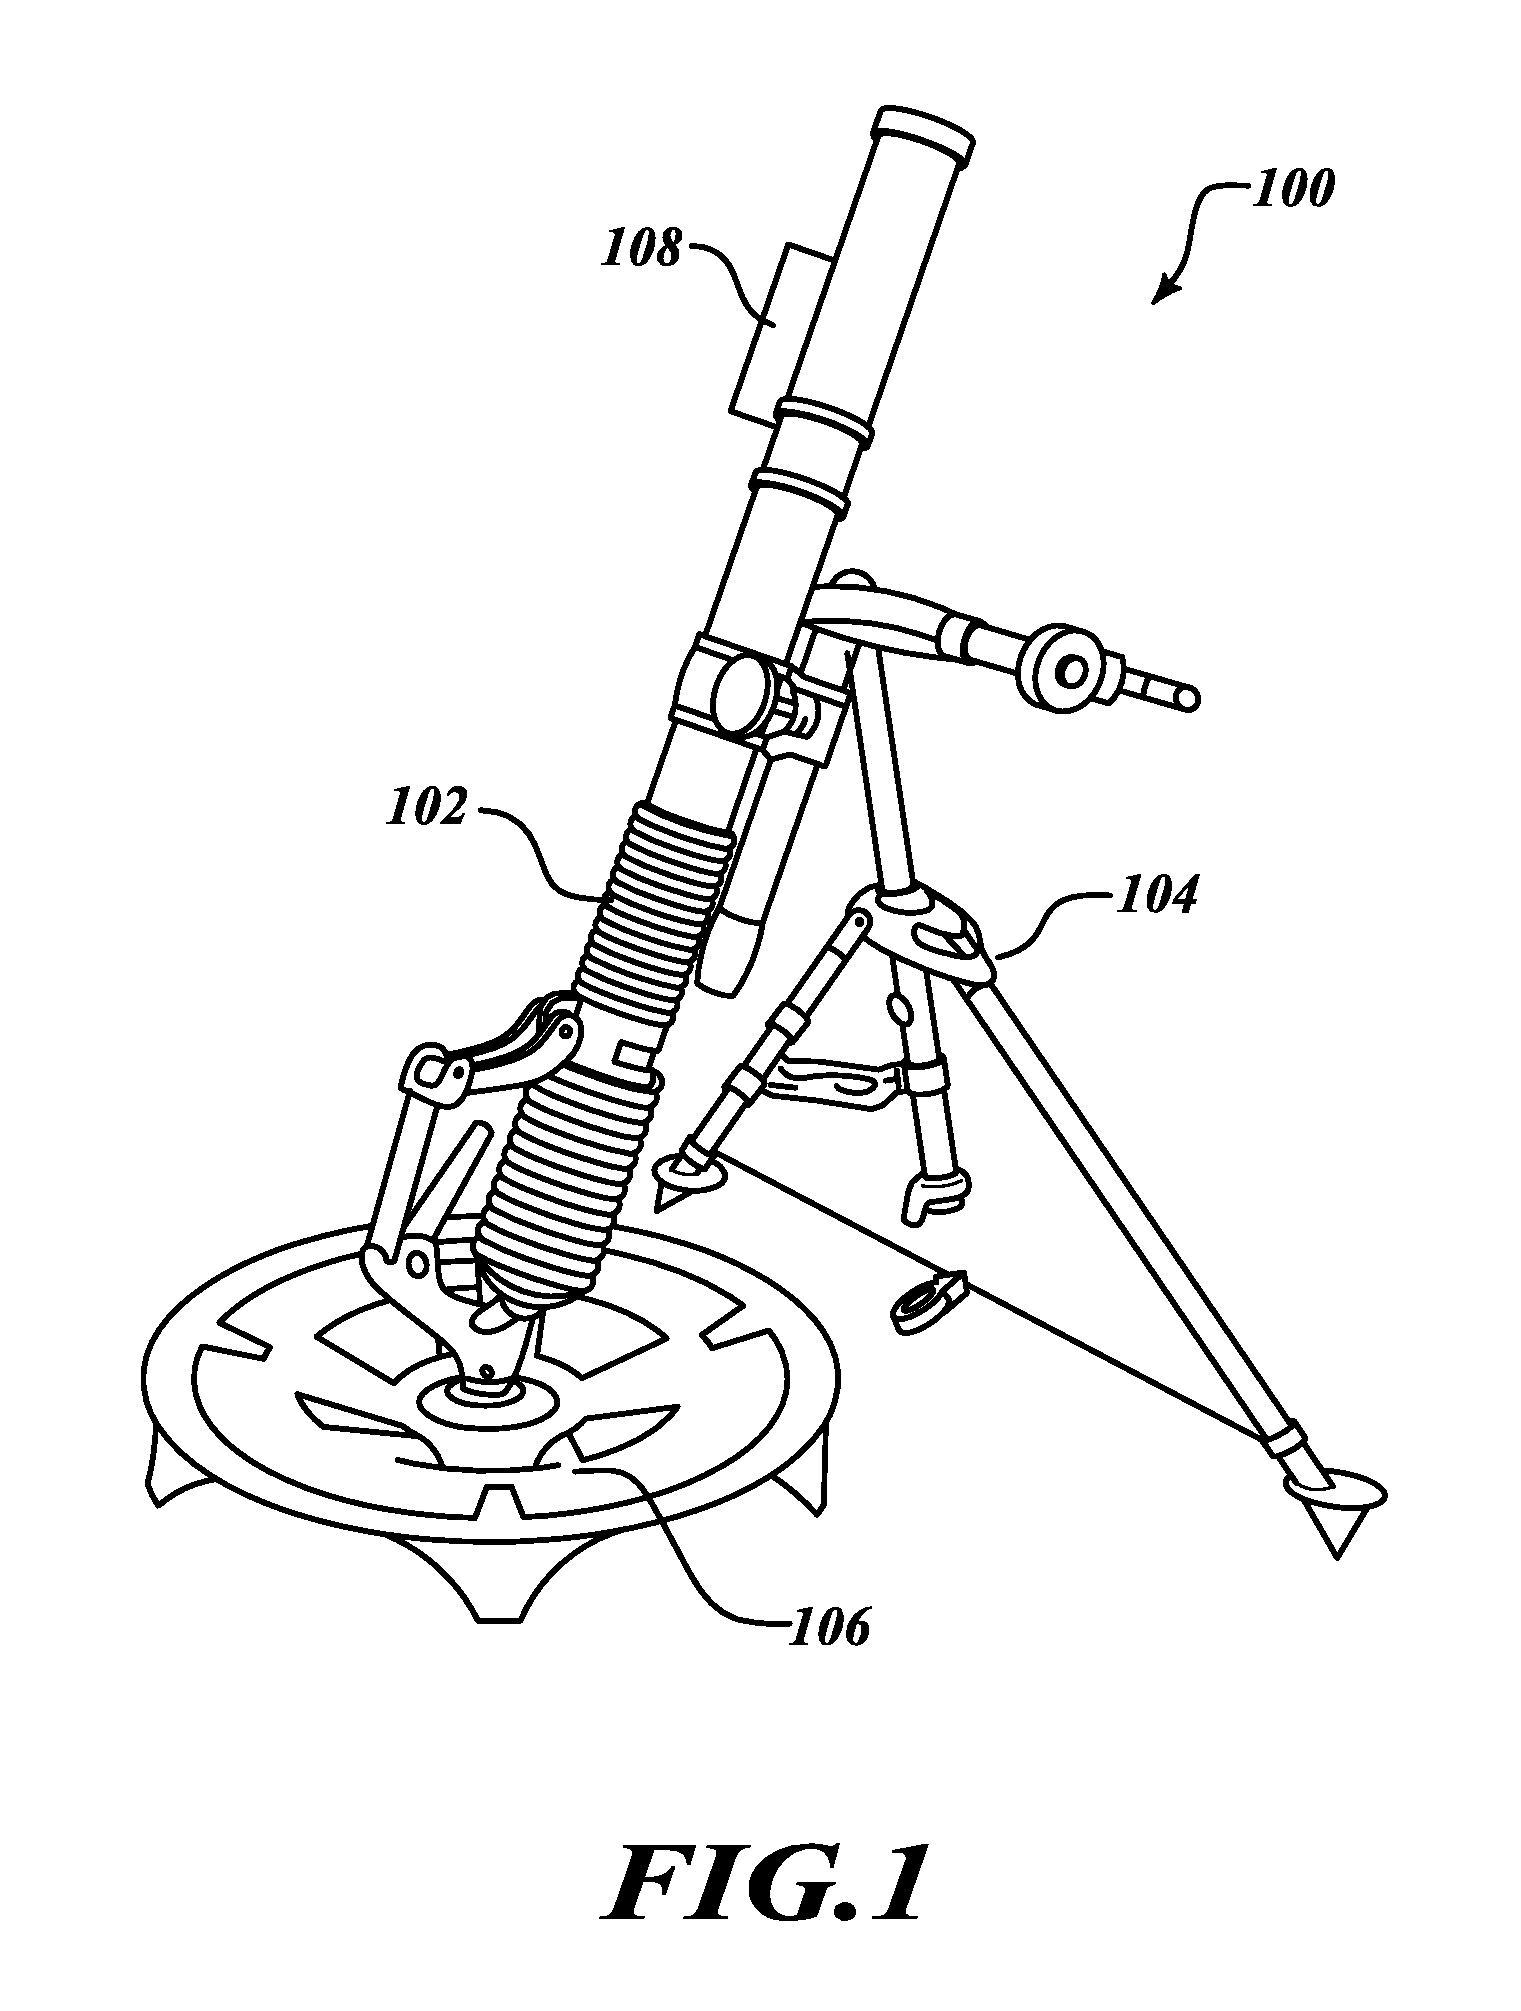 Systems and methods for a lightweight north-finder